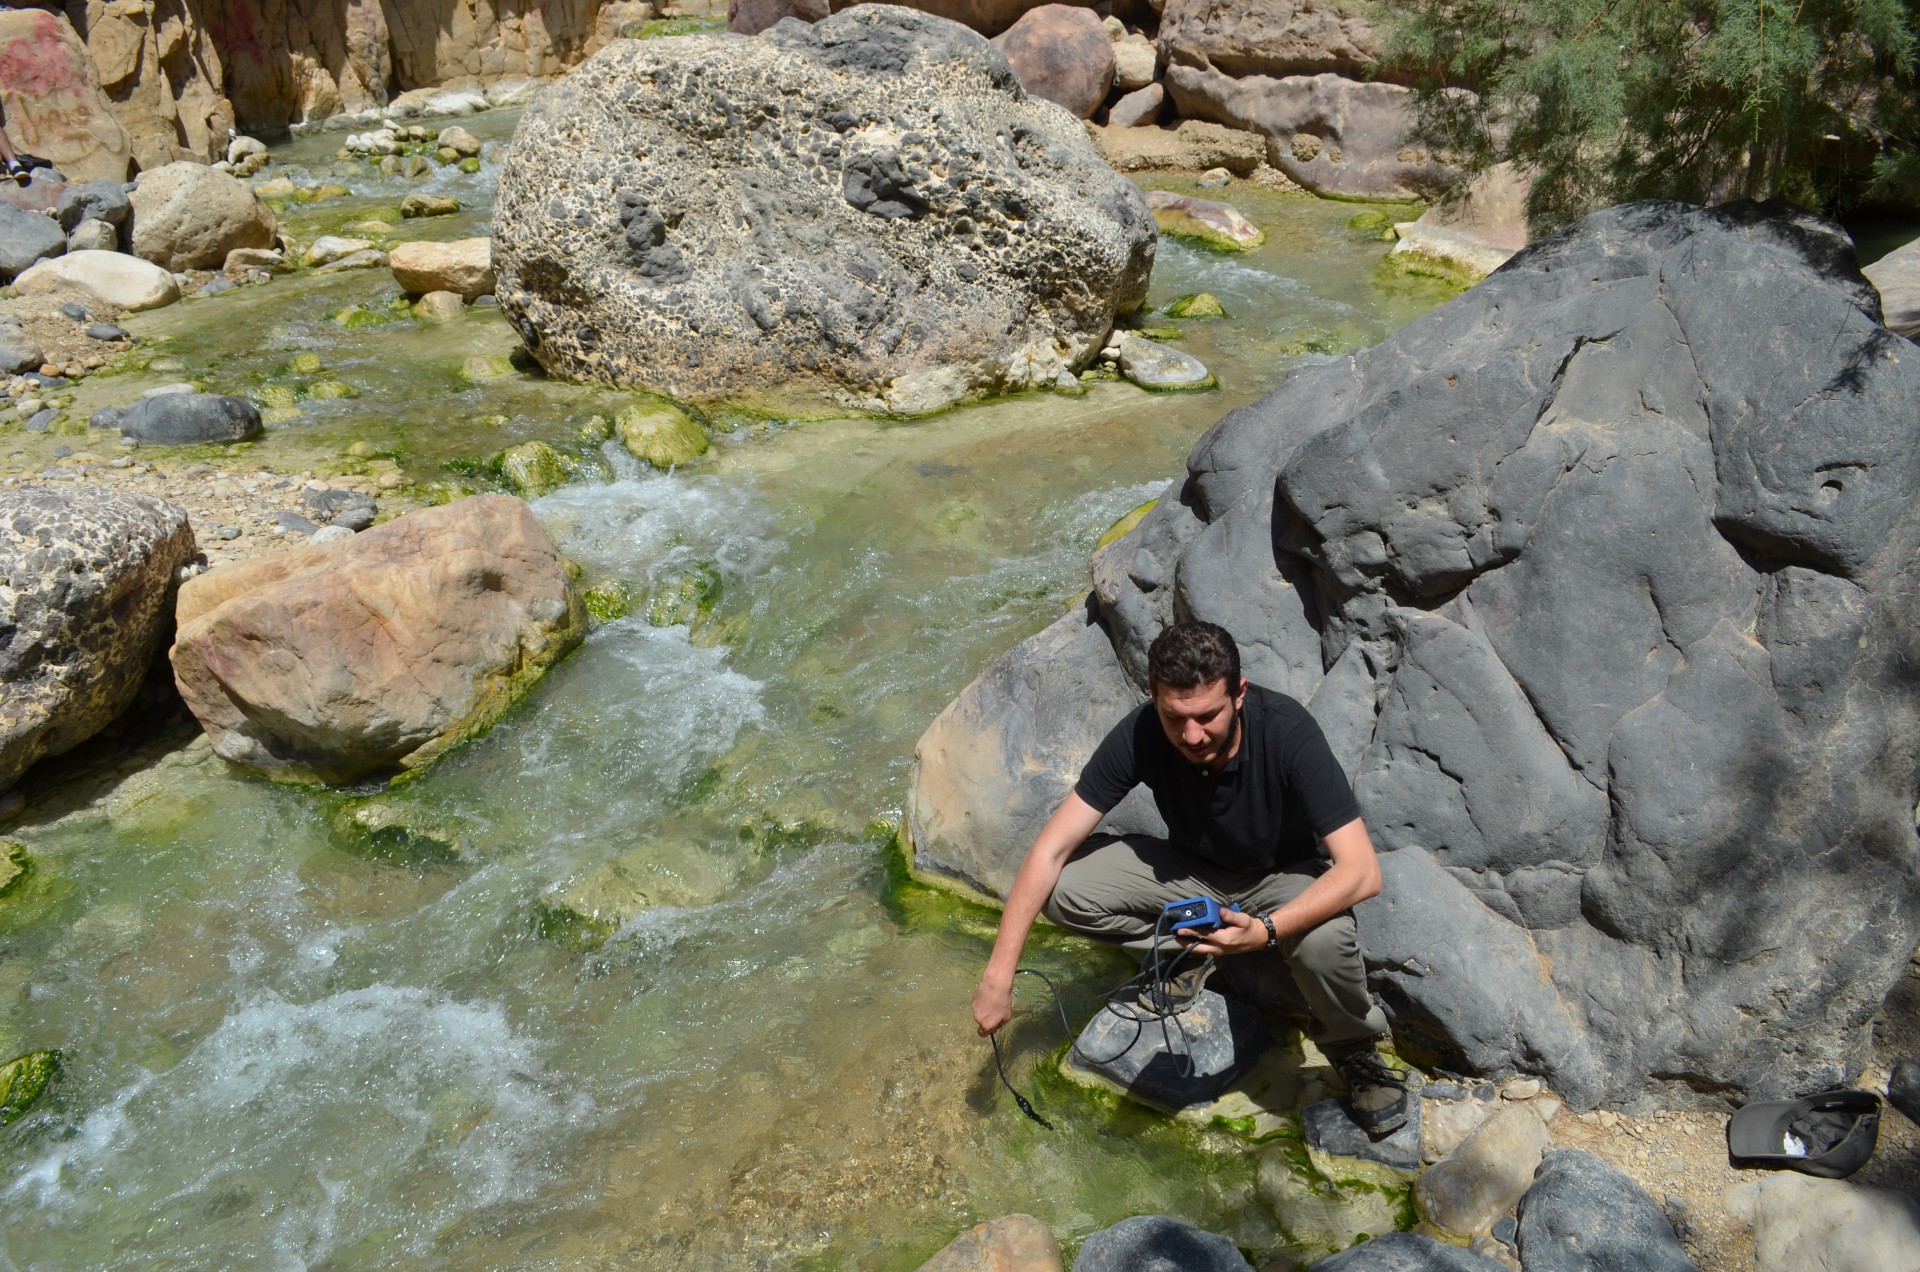 Mohamad Alqadi, a Jordanian PhD. student at the University of Munich, tests pH and temperature of stream water in a canyon.